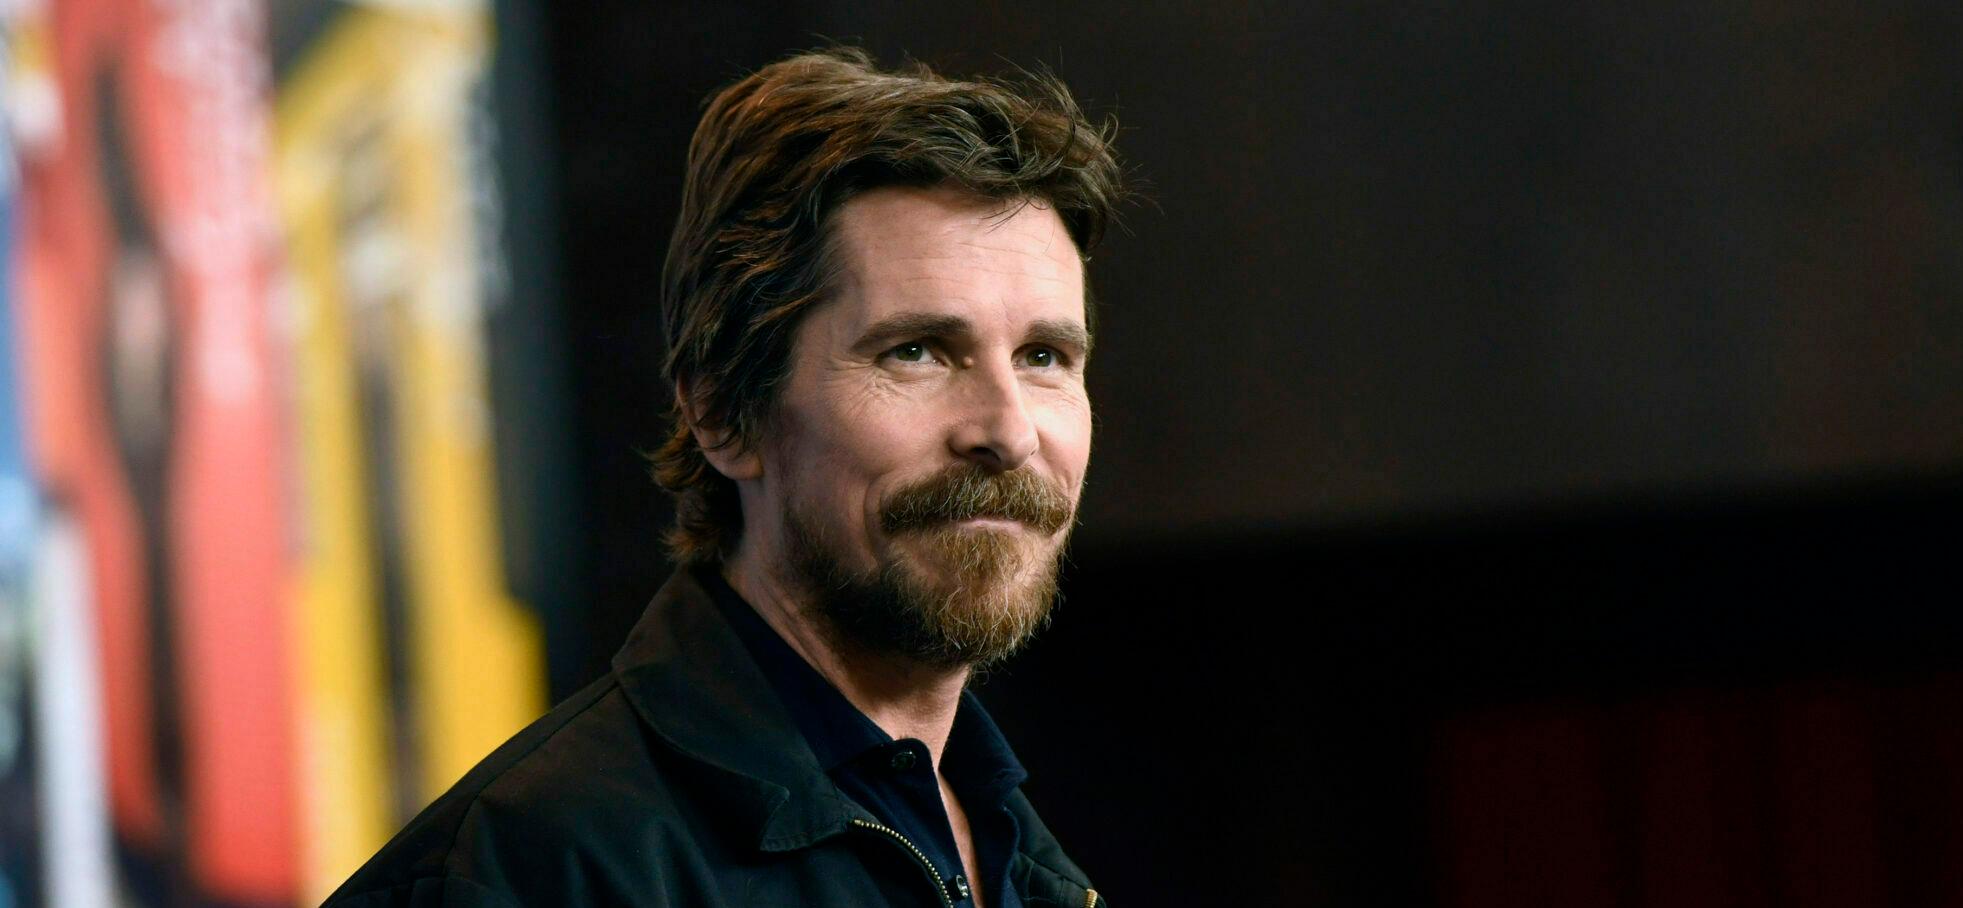 What Is Christian Bale’s Pact With Christopher Nolan About??